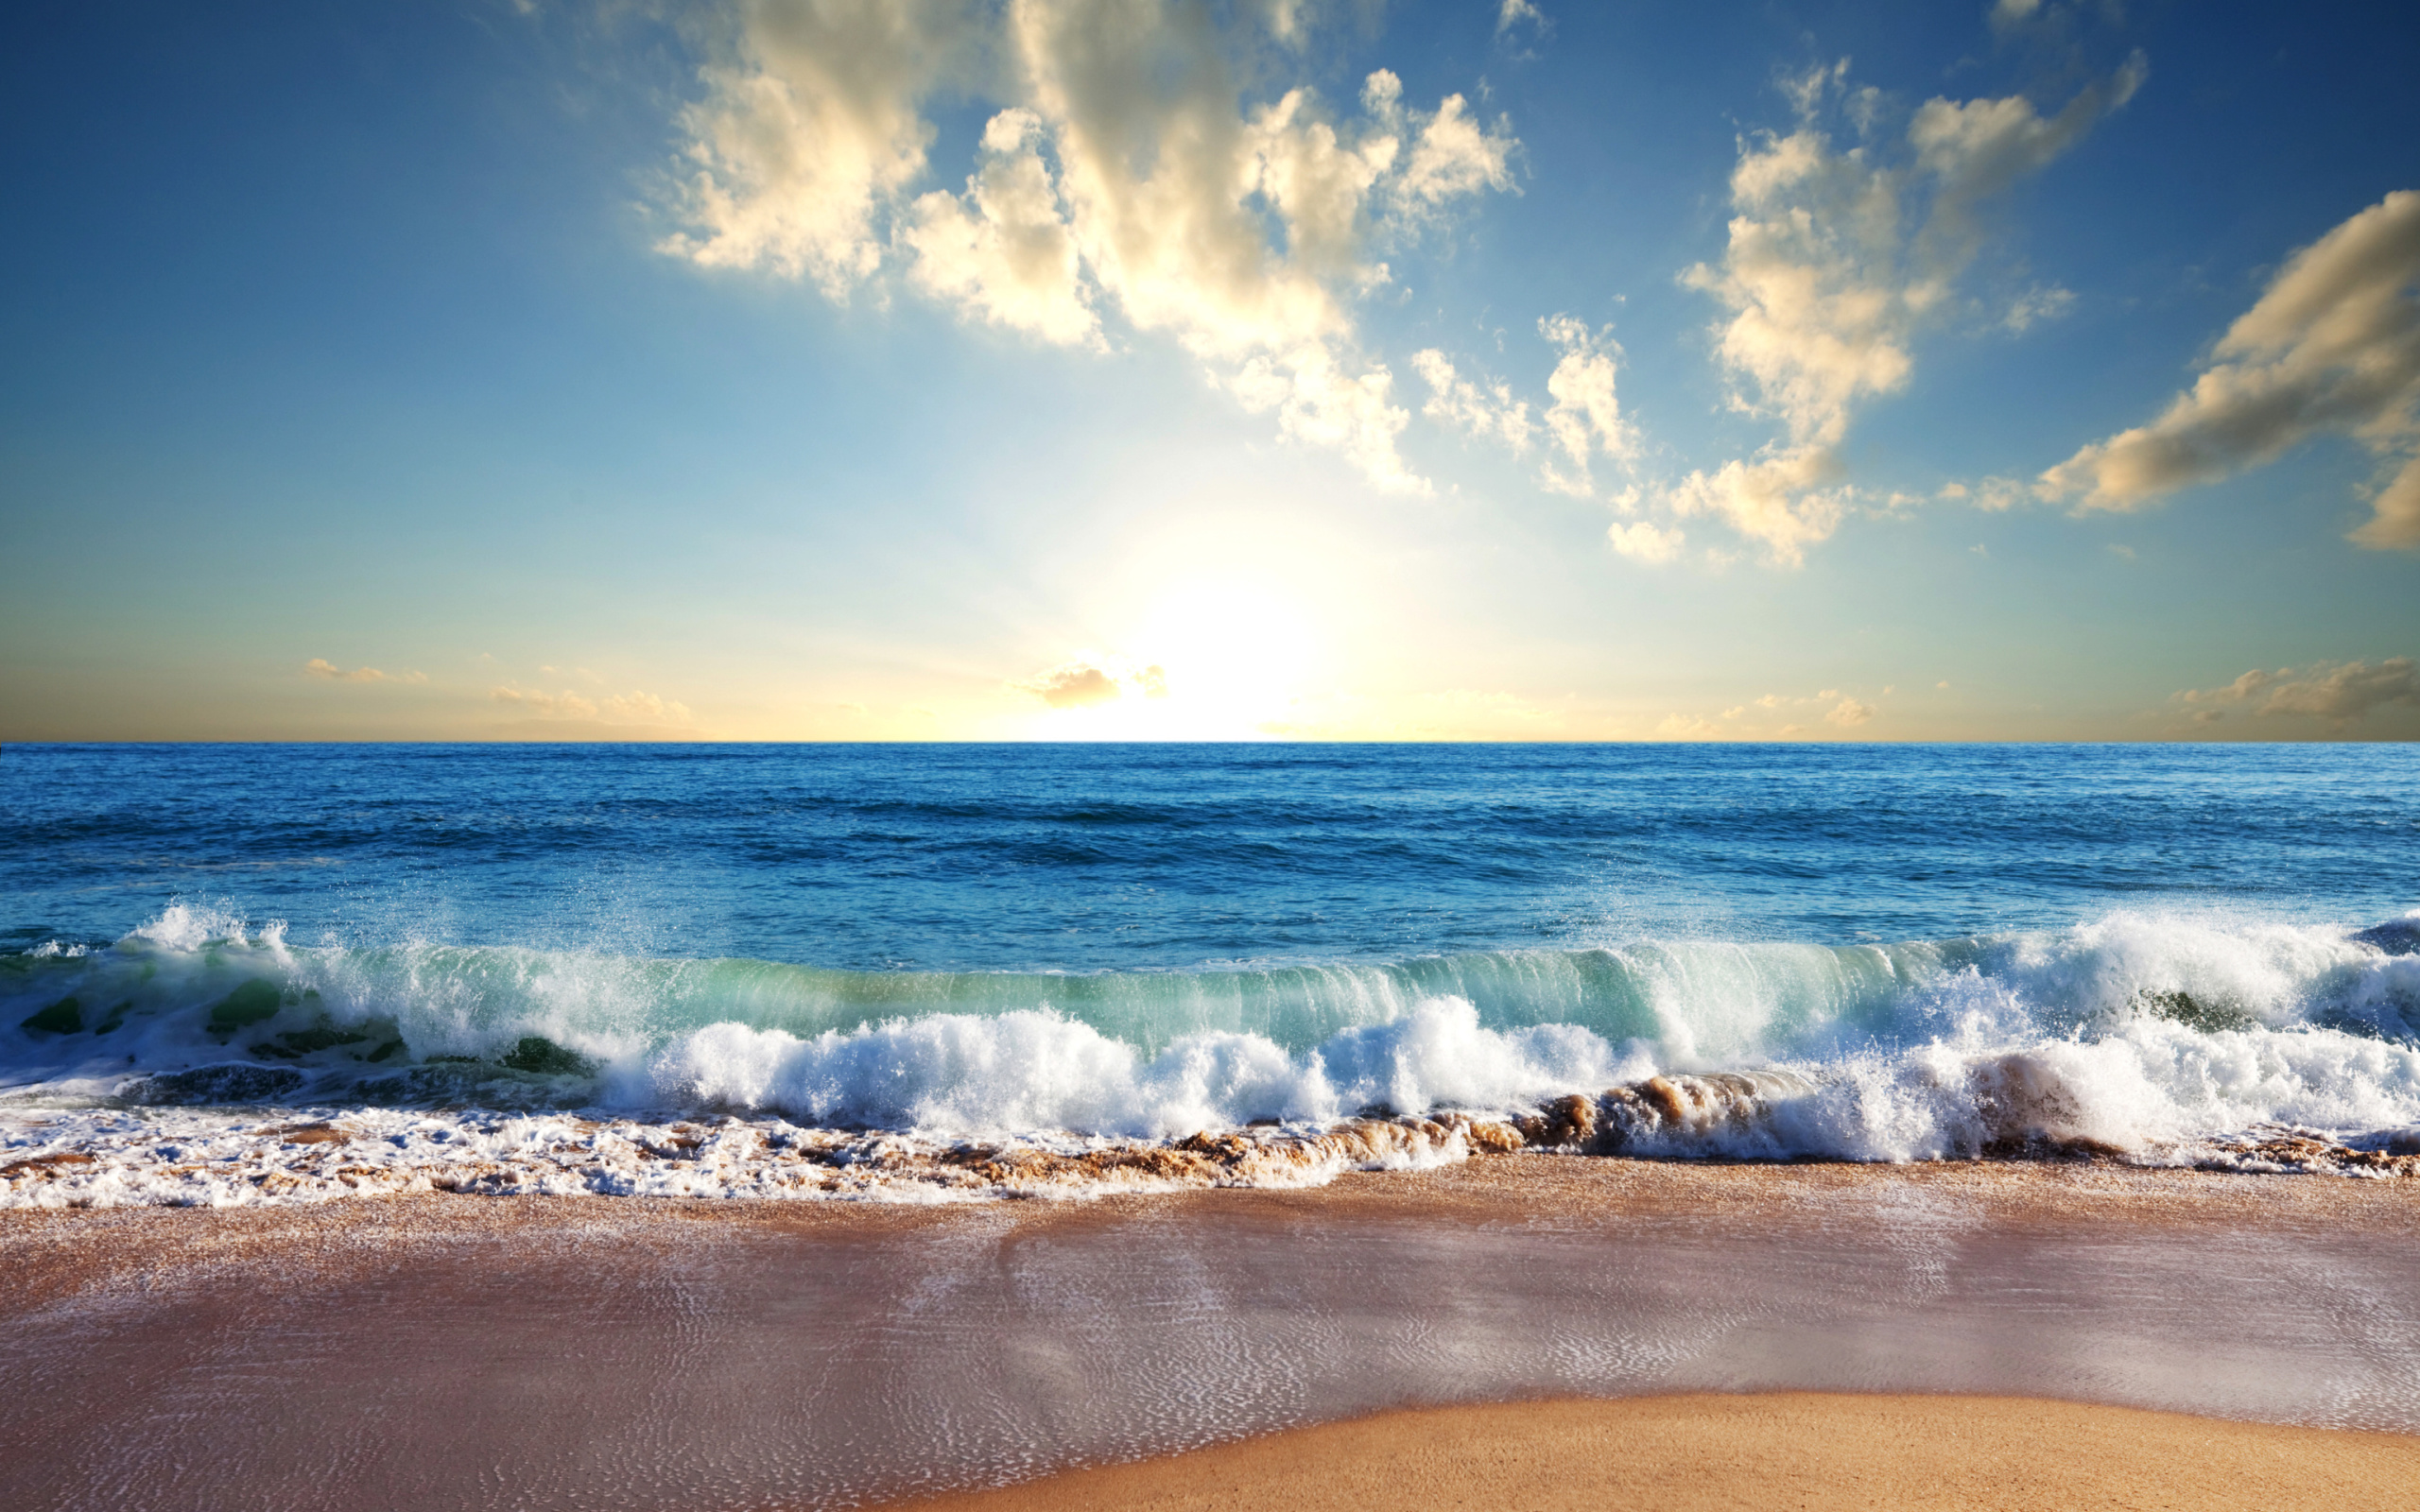 Beach and Waves wallpaper 2560x1600